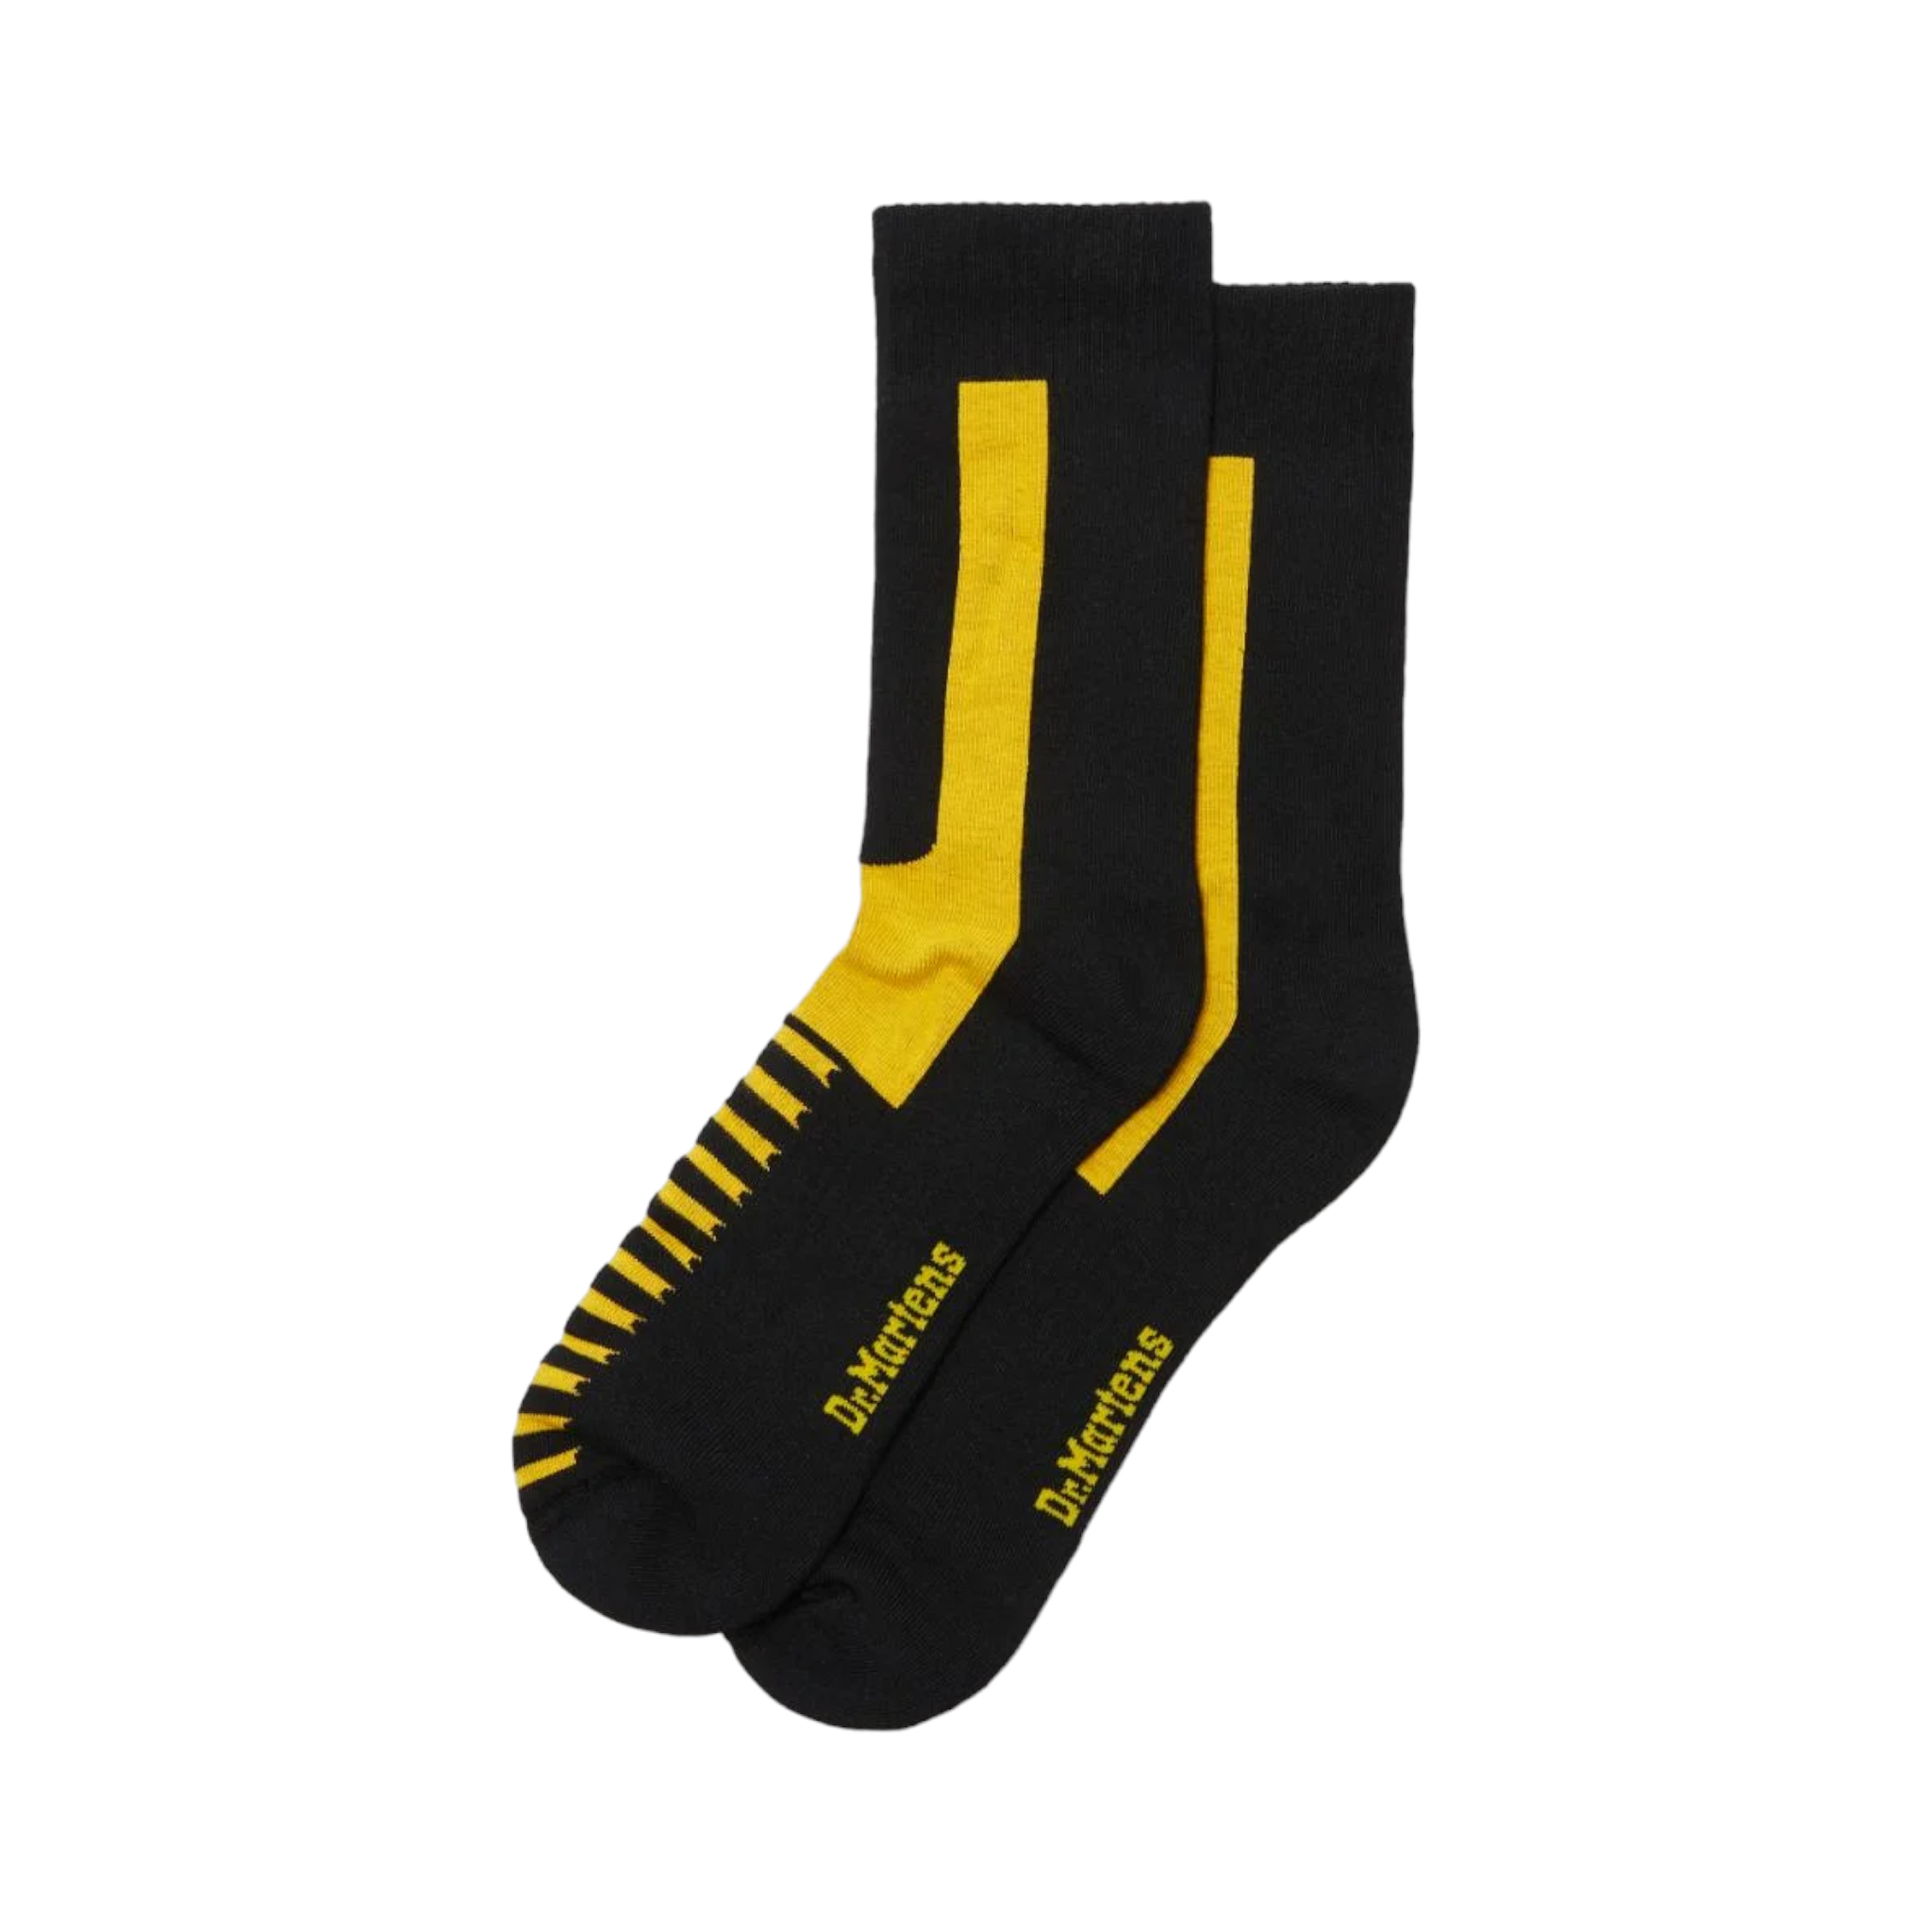 Shop Double Doc Sock - with shoe&amp;me - from Dr. Martens - Accessories/Products - Accessories/Products, Boot, Mens, Socks, Womens - [collection]